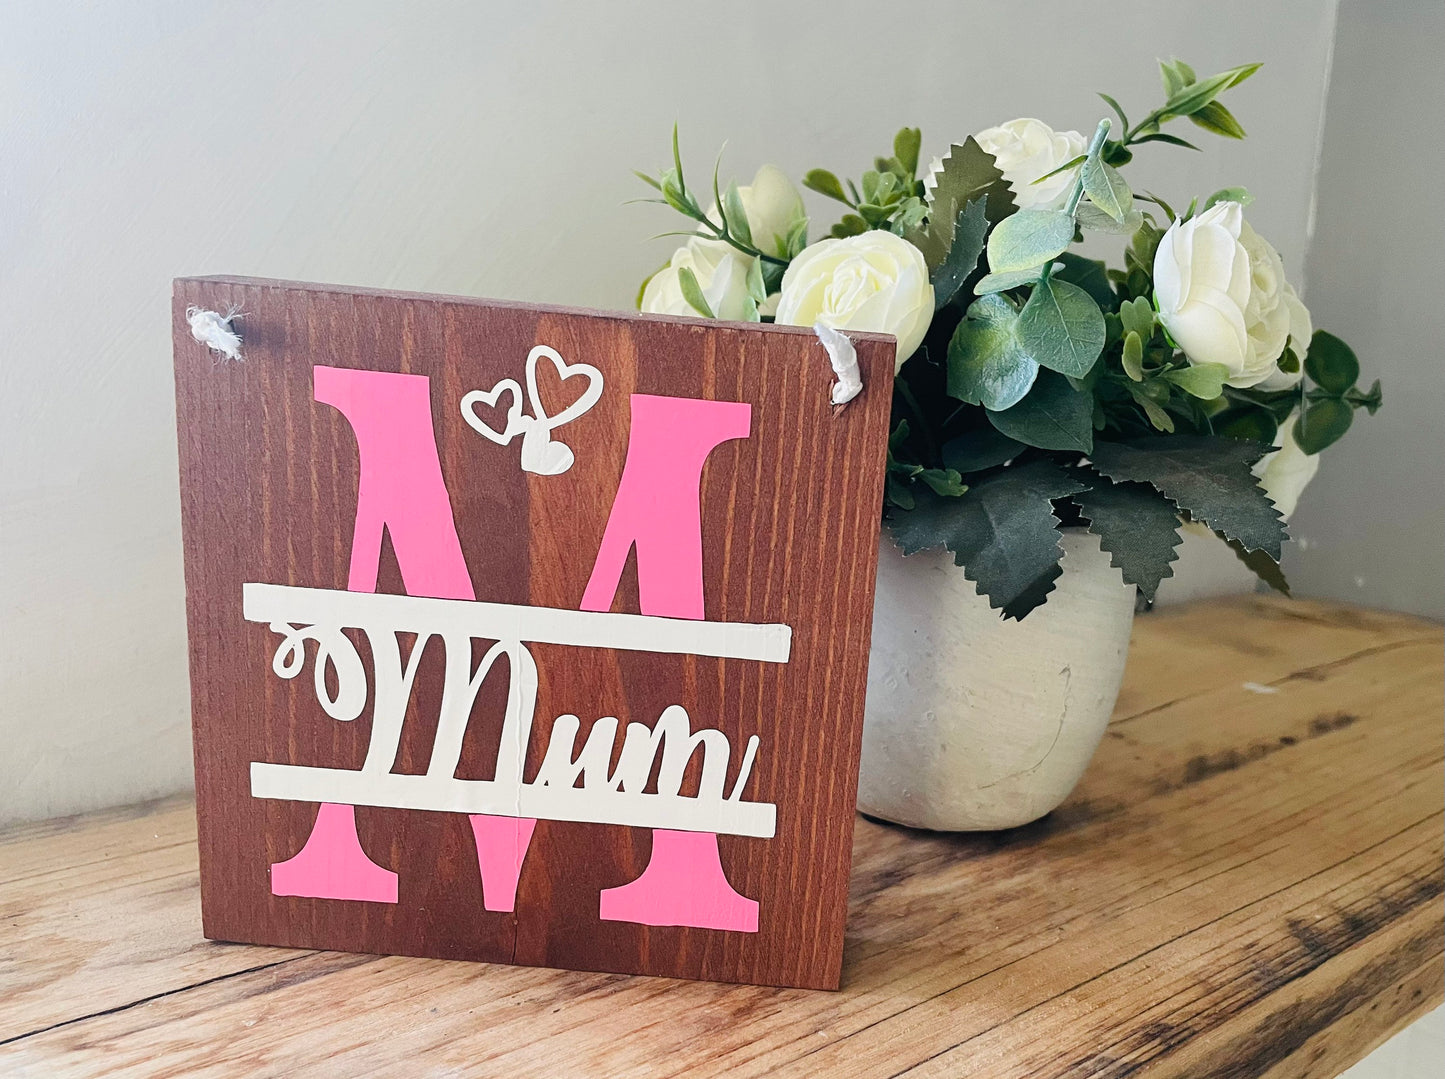 World's Best Mum Hanging Wooden Mother’s Day Gift, Pink Glitter Globe Gift with Hearts from Daughter, Special Birthday Keepsake for Mom